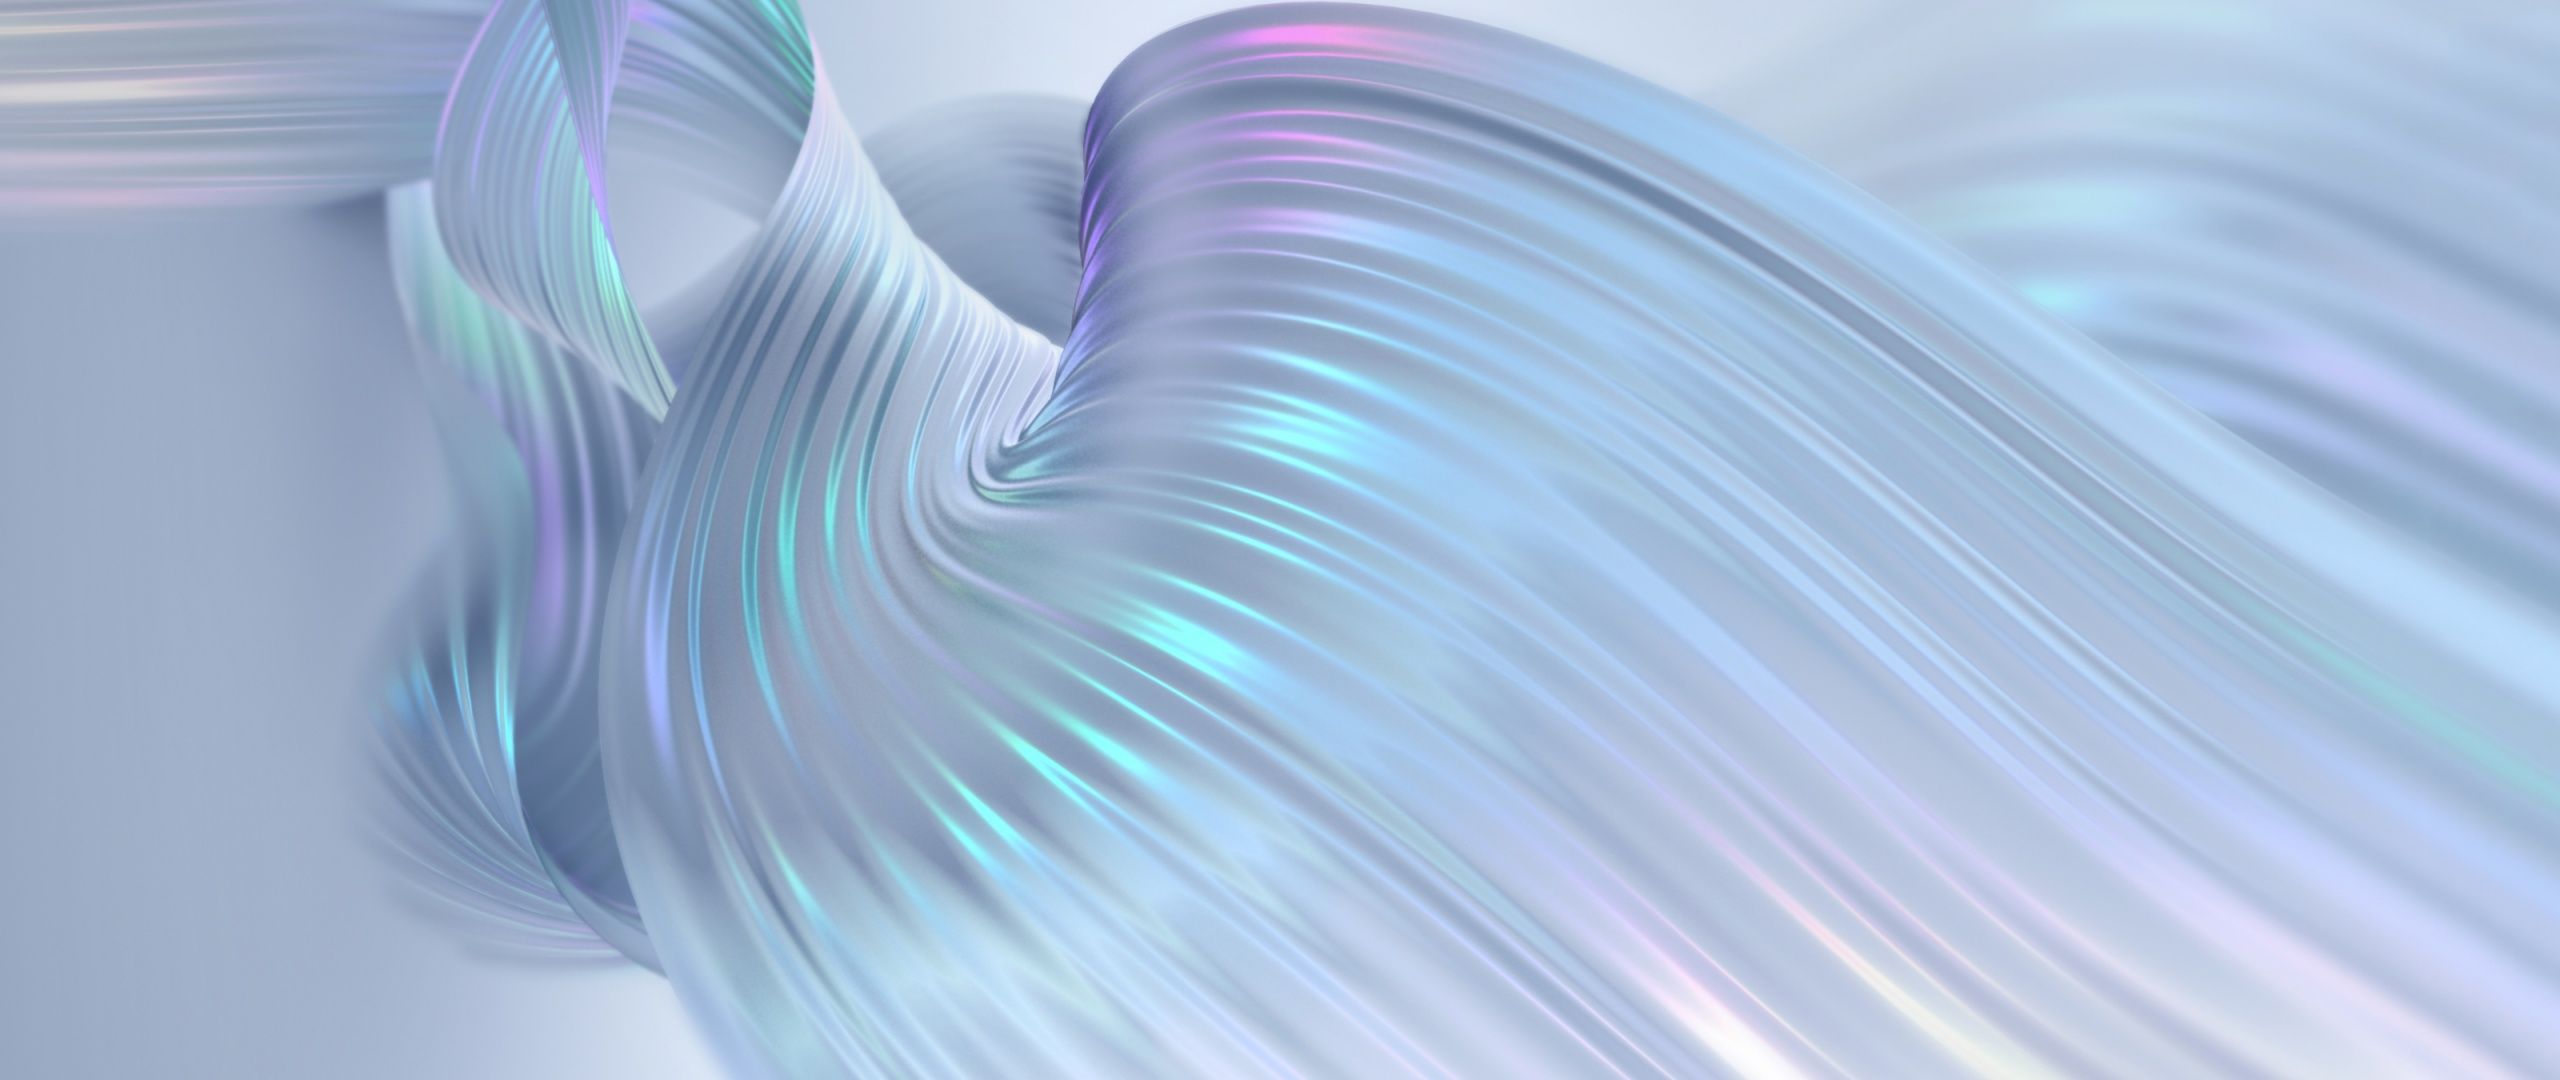 A wave of iridescent, flowing ribbons - Glossy, wings, 3D